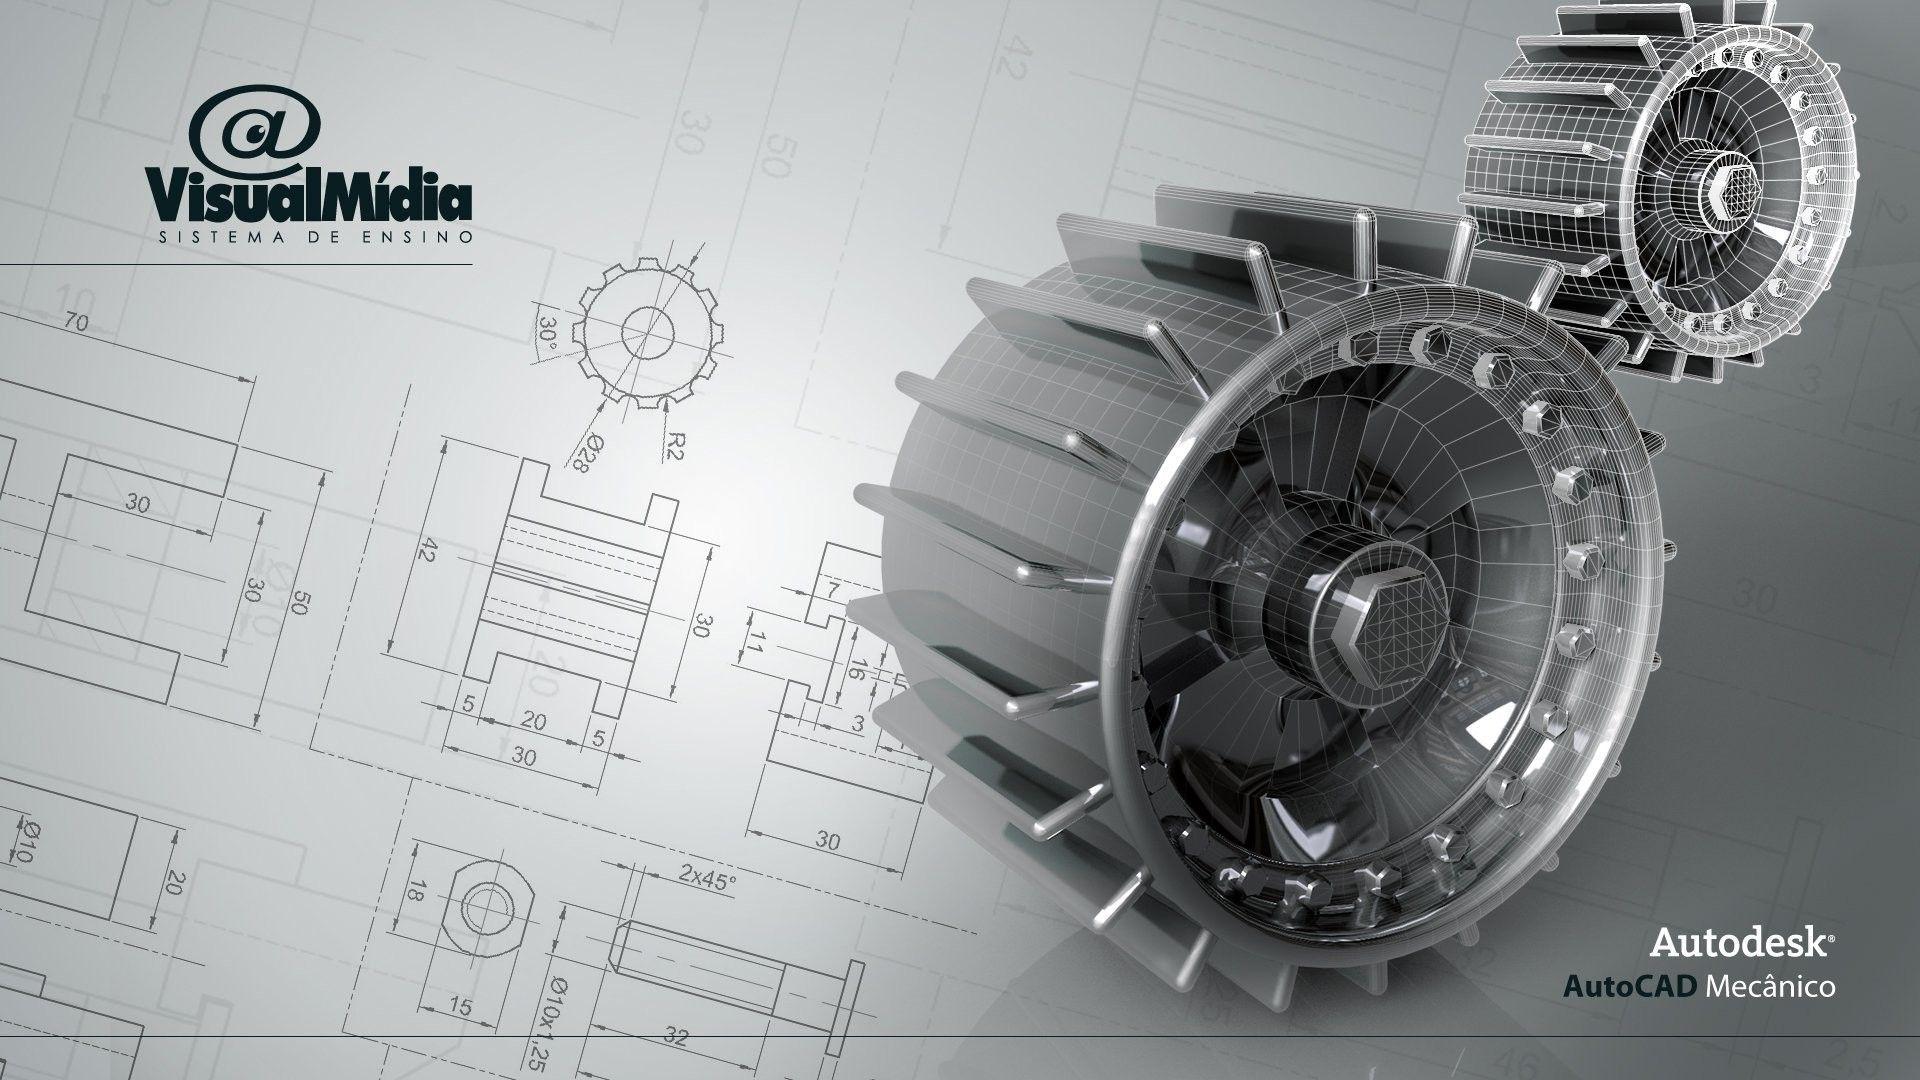 Free HD Engineering Wallpaper For Download. Mechanical